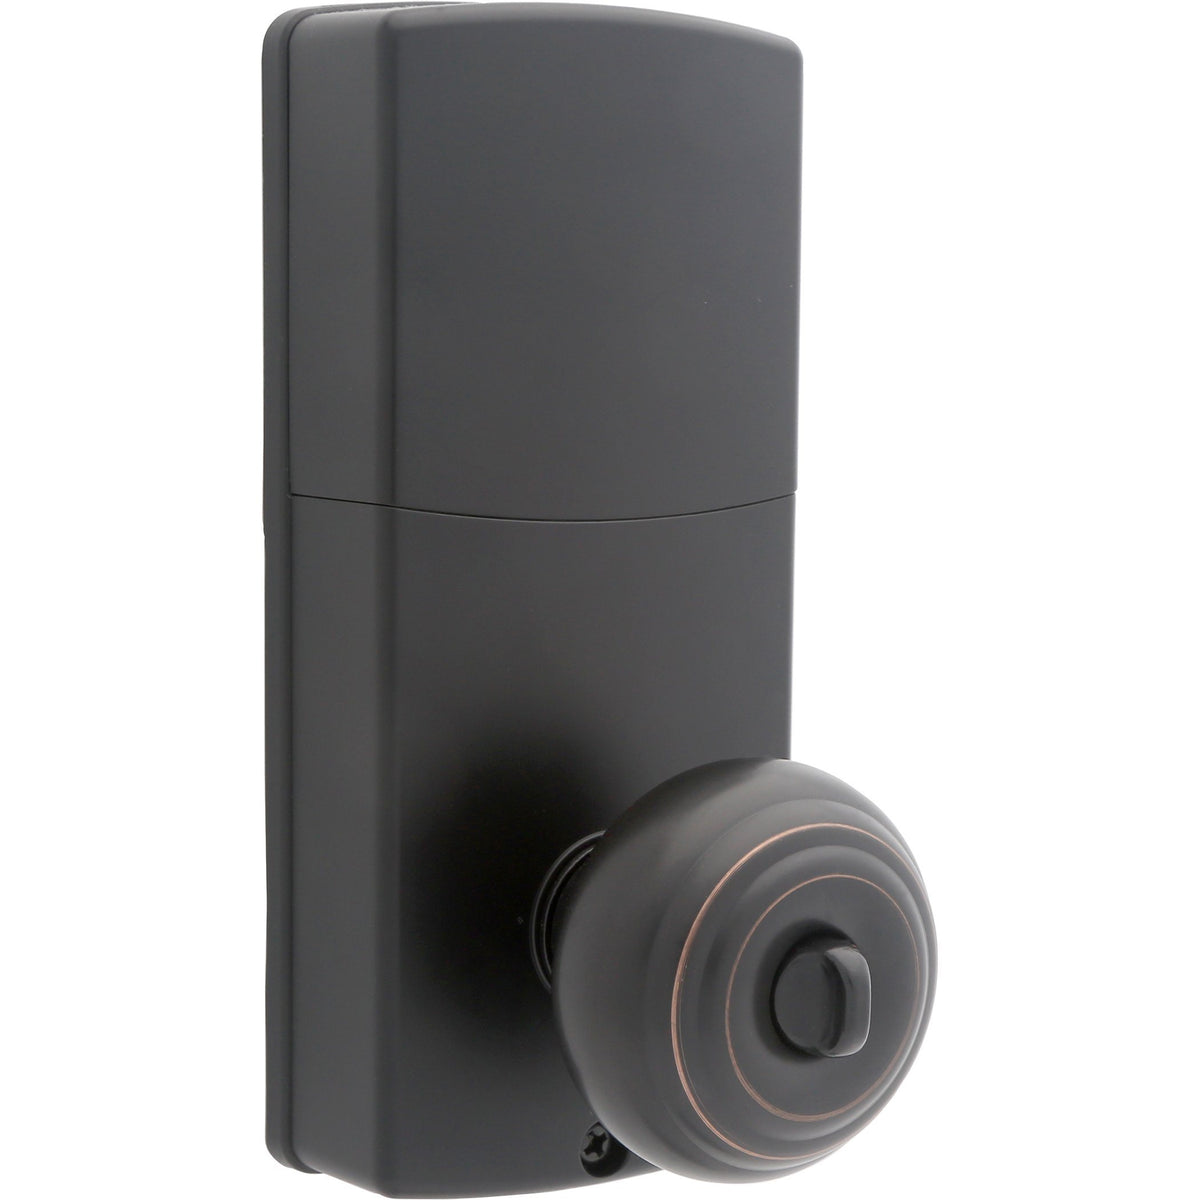 Honeywell 8732401 Electronic Entry Knob Door Lock with Keypad Oil Rubbed Bronze Backside